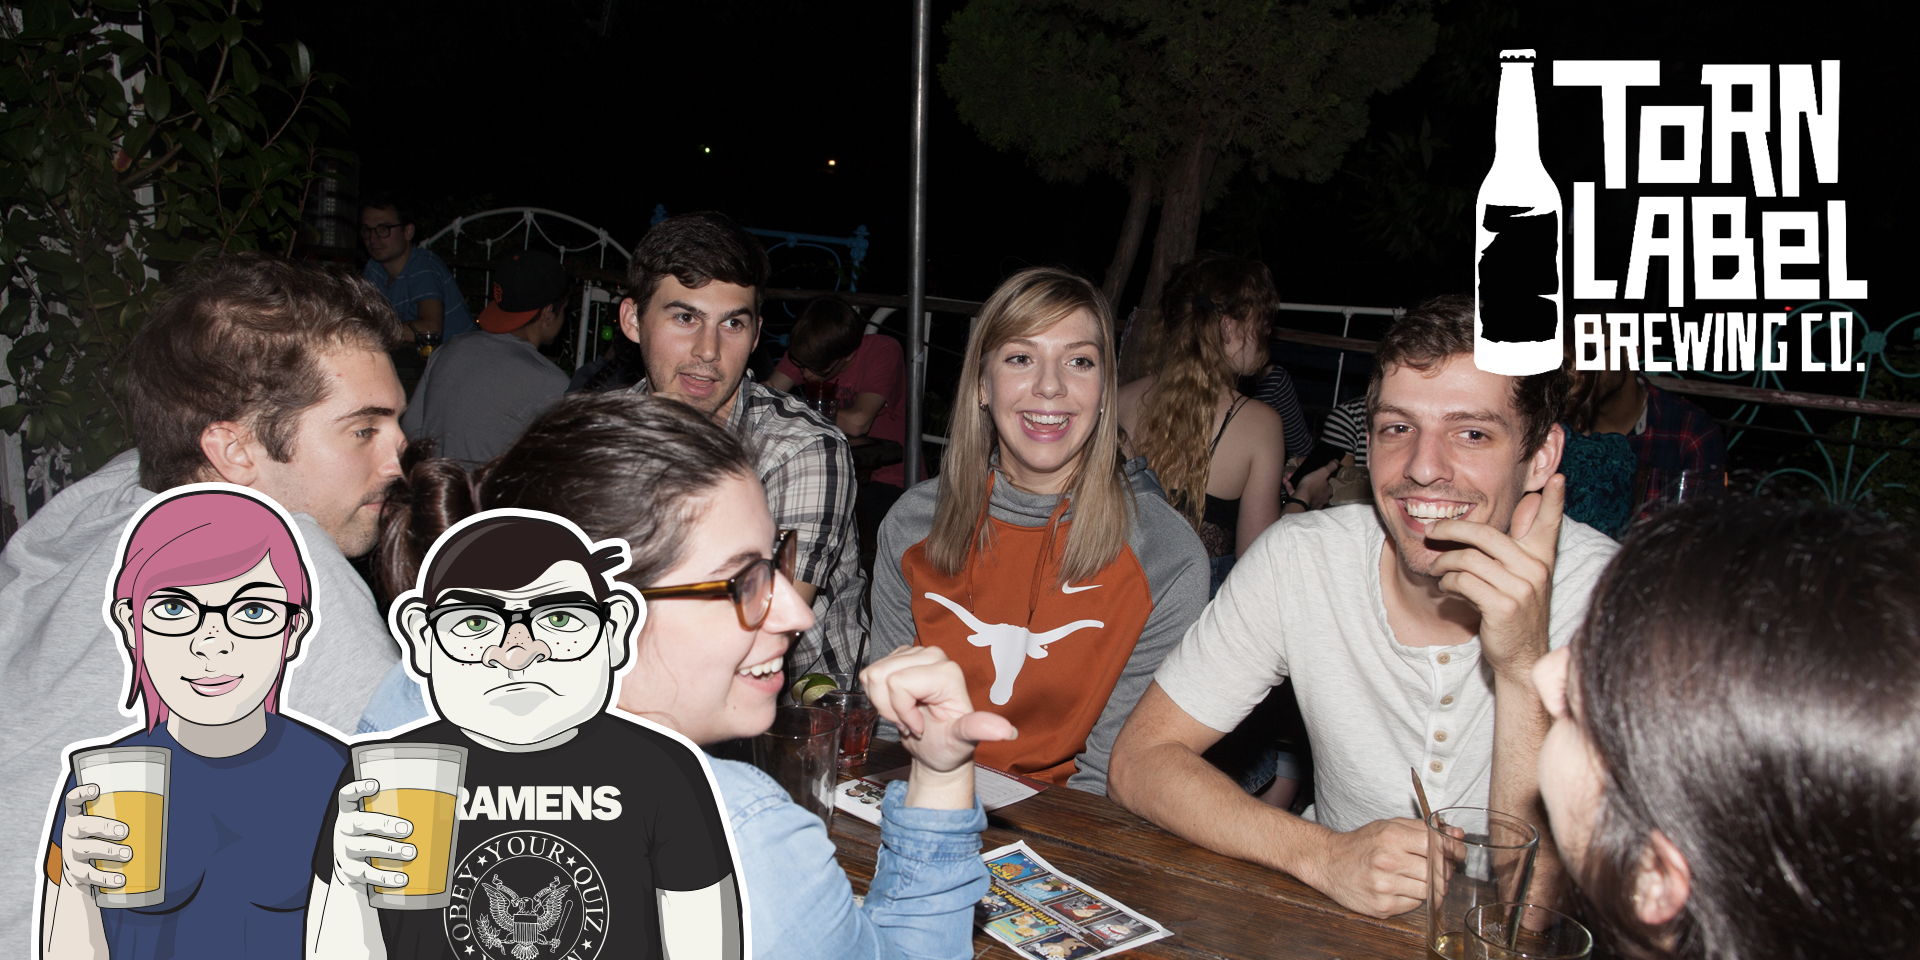 Geeks Who Drink Trivia Night at Torn Label Brewing Co. promotional image